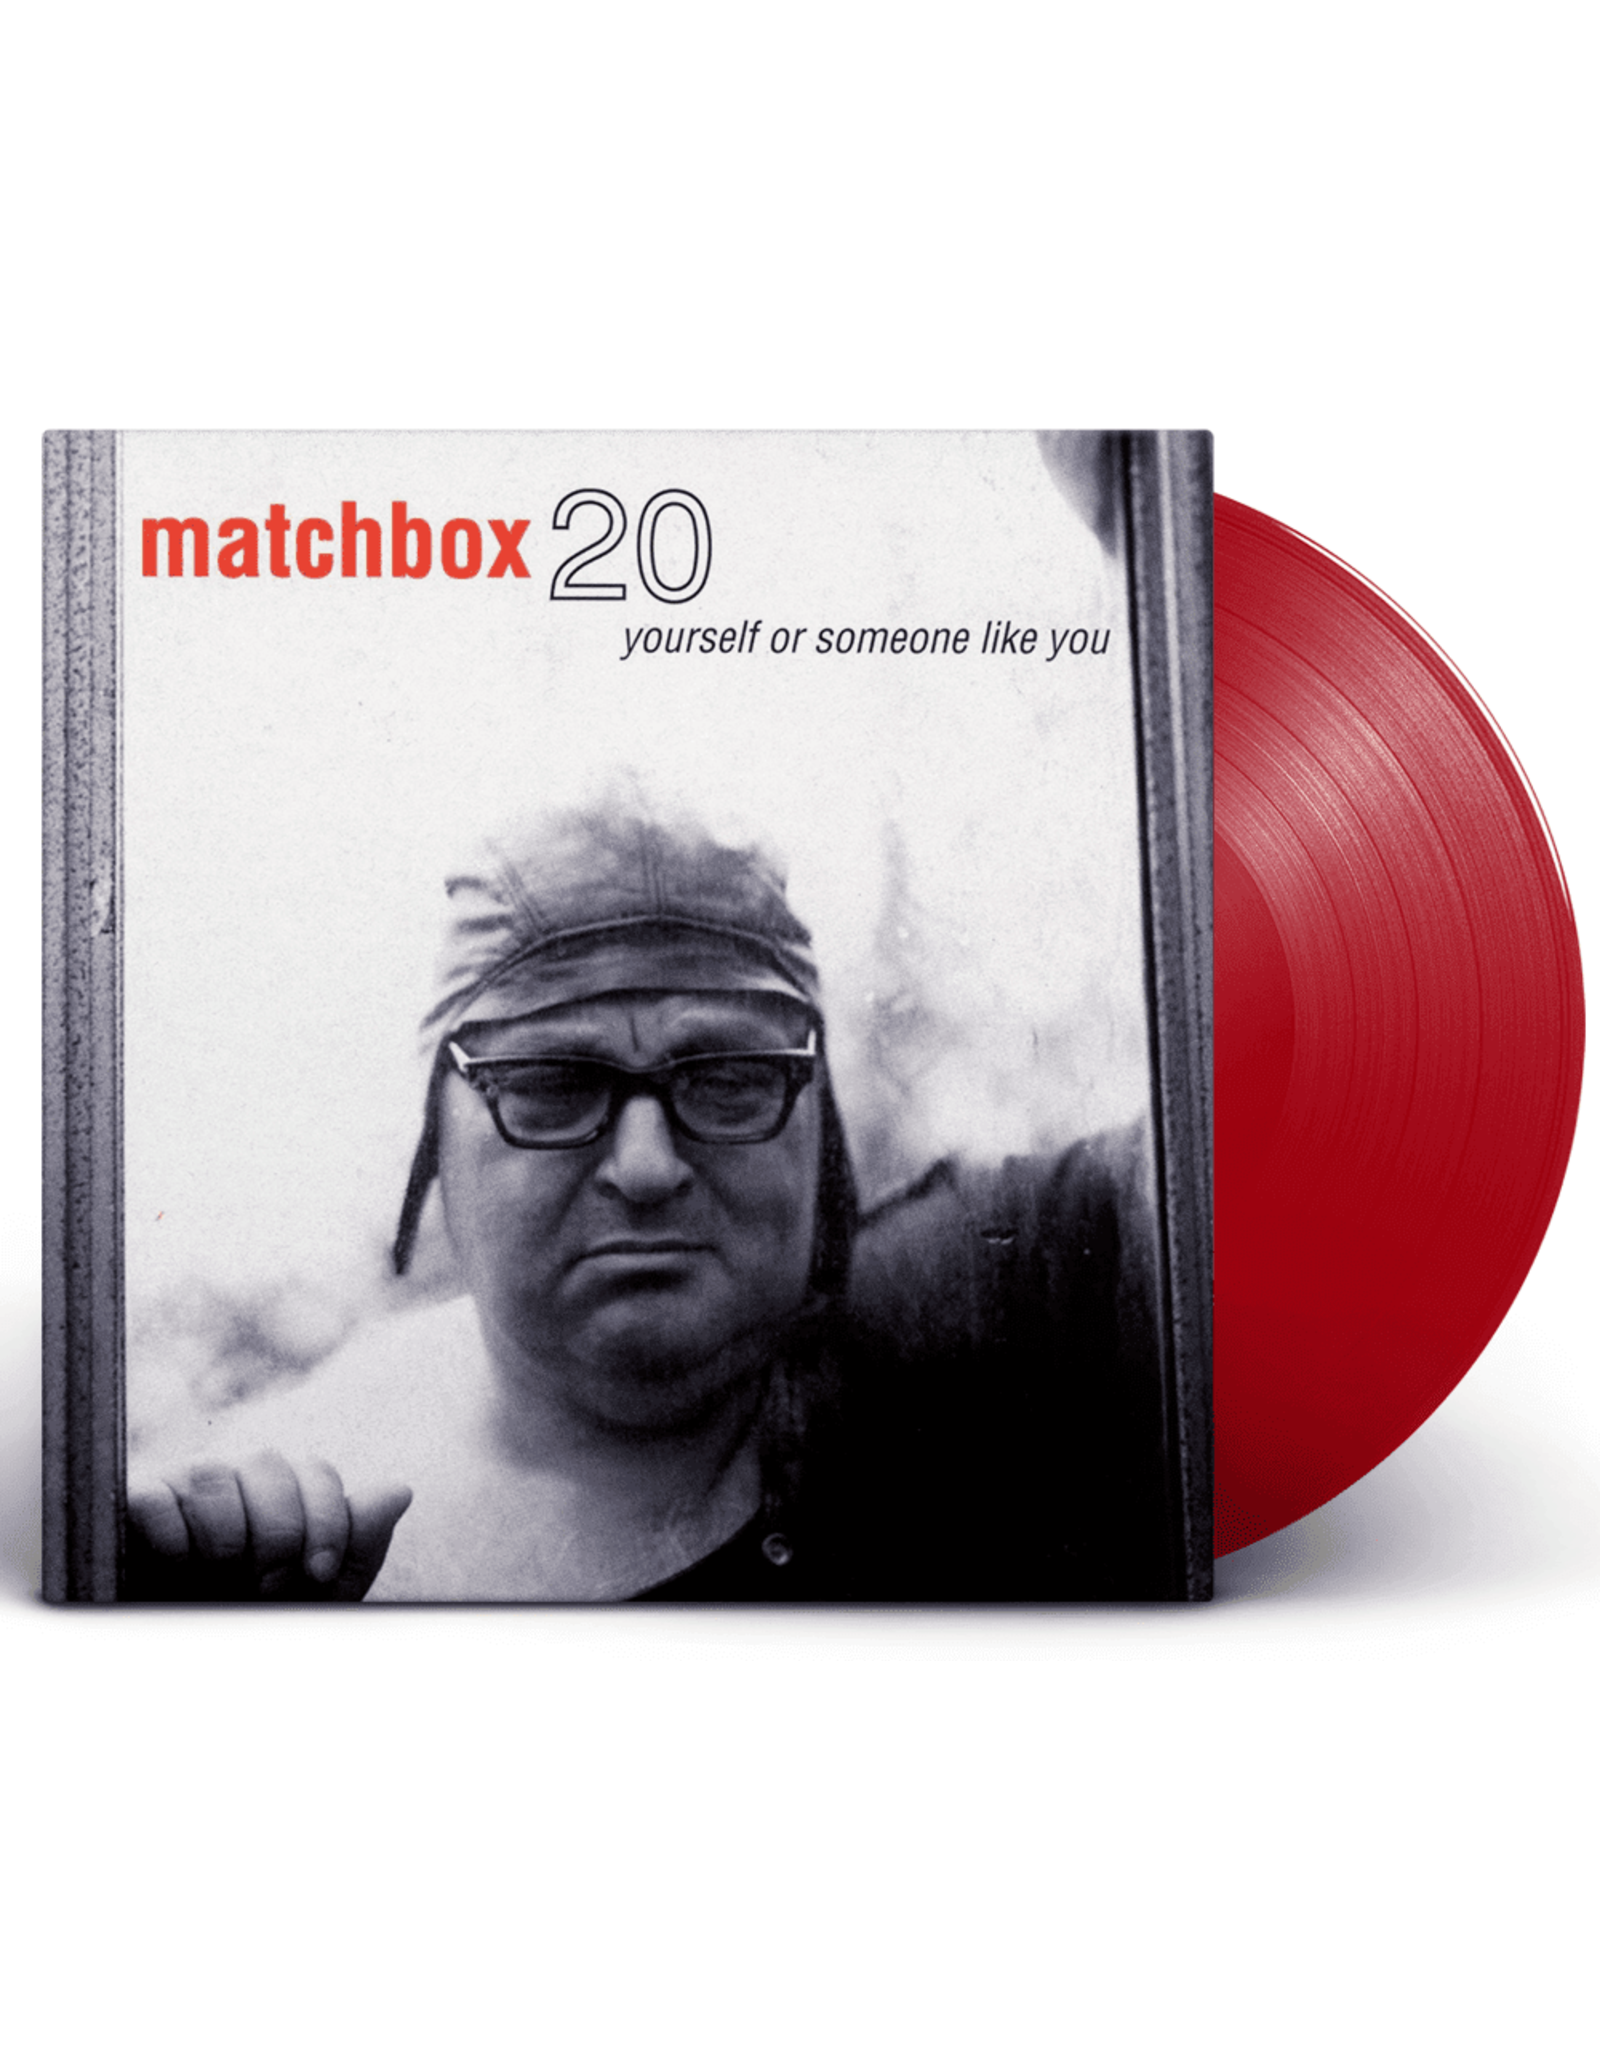 Matchbox 20 - Yourself Or Someone Like You (Red Vinyl)